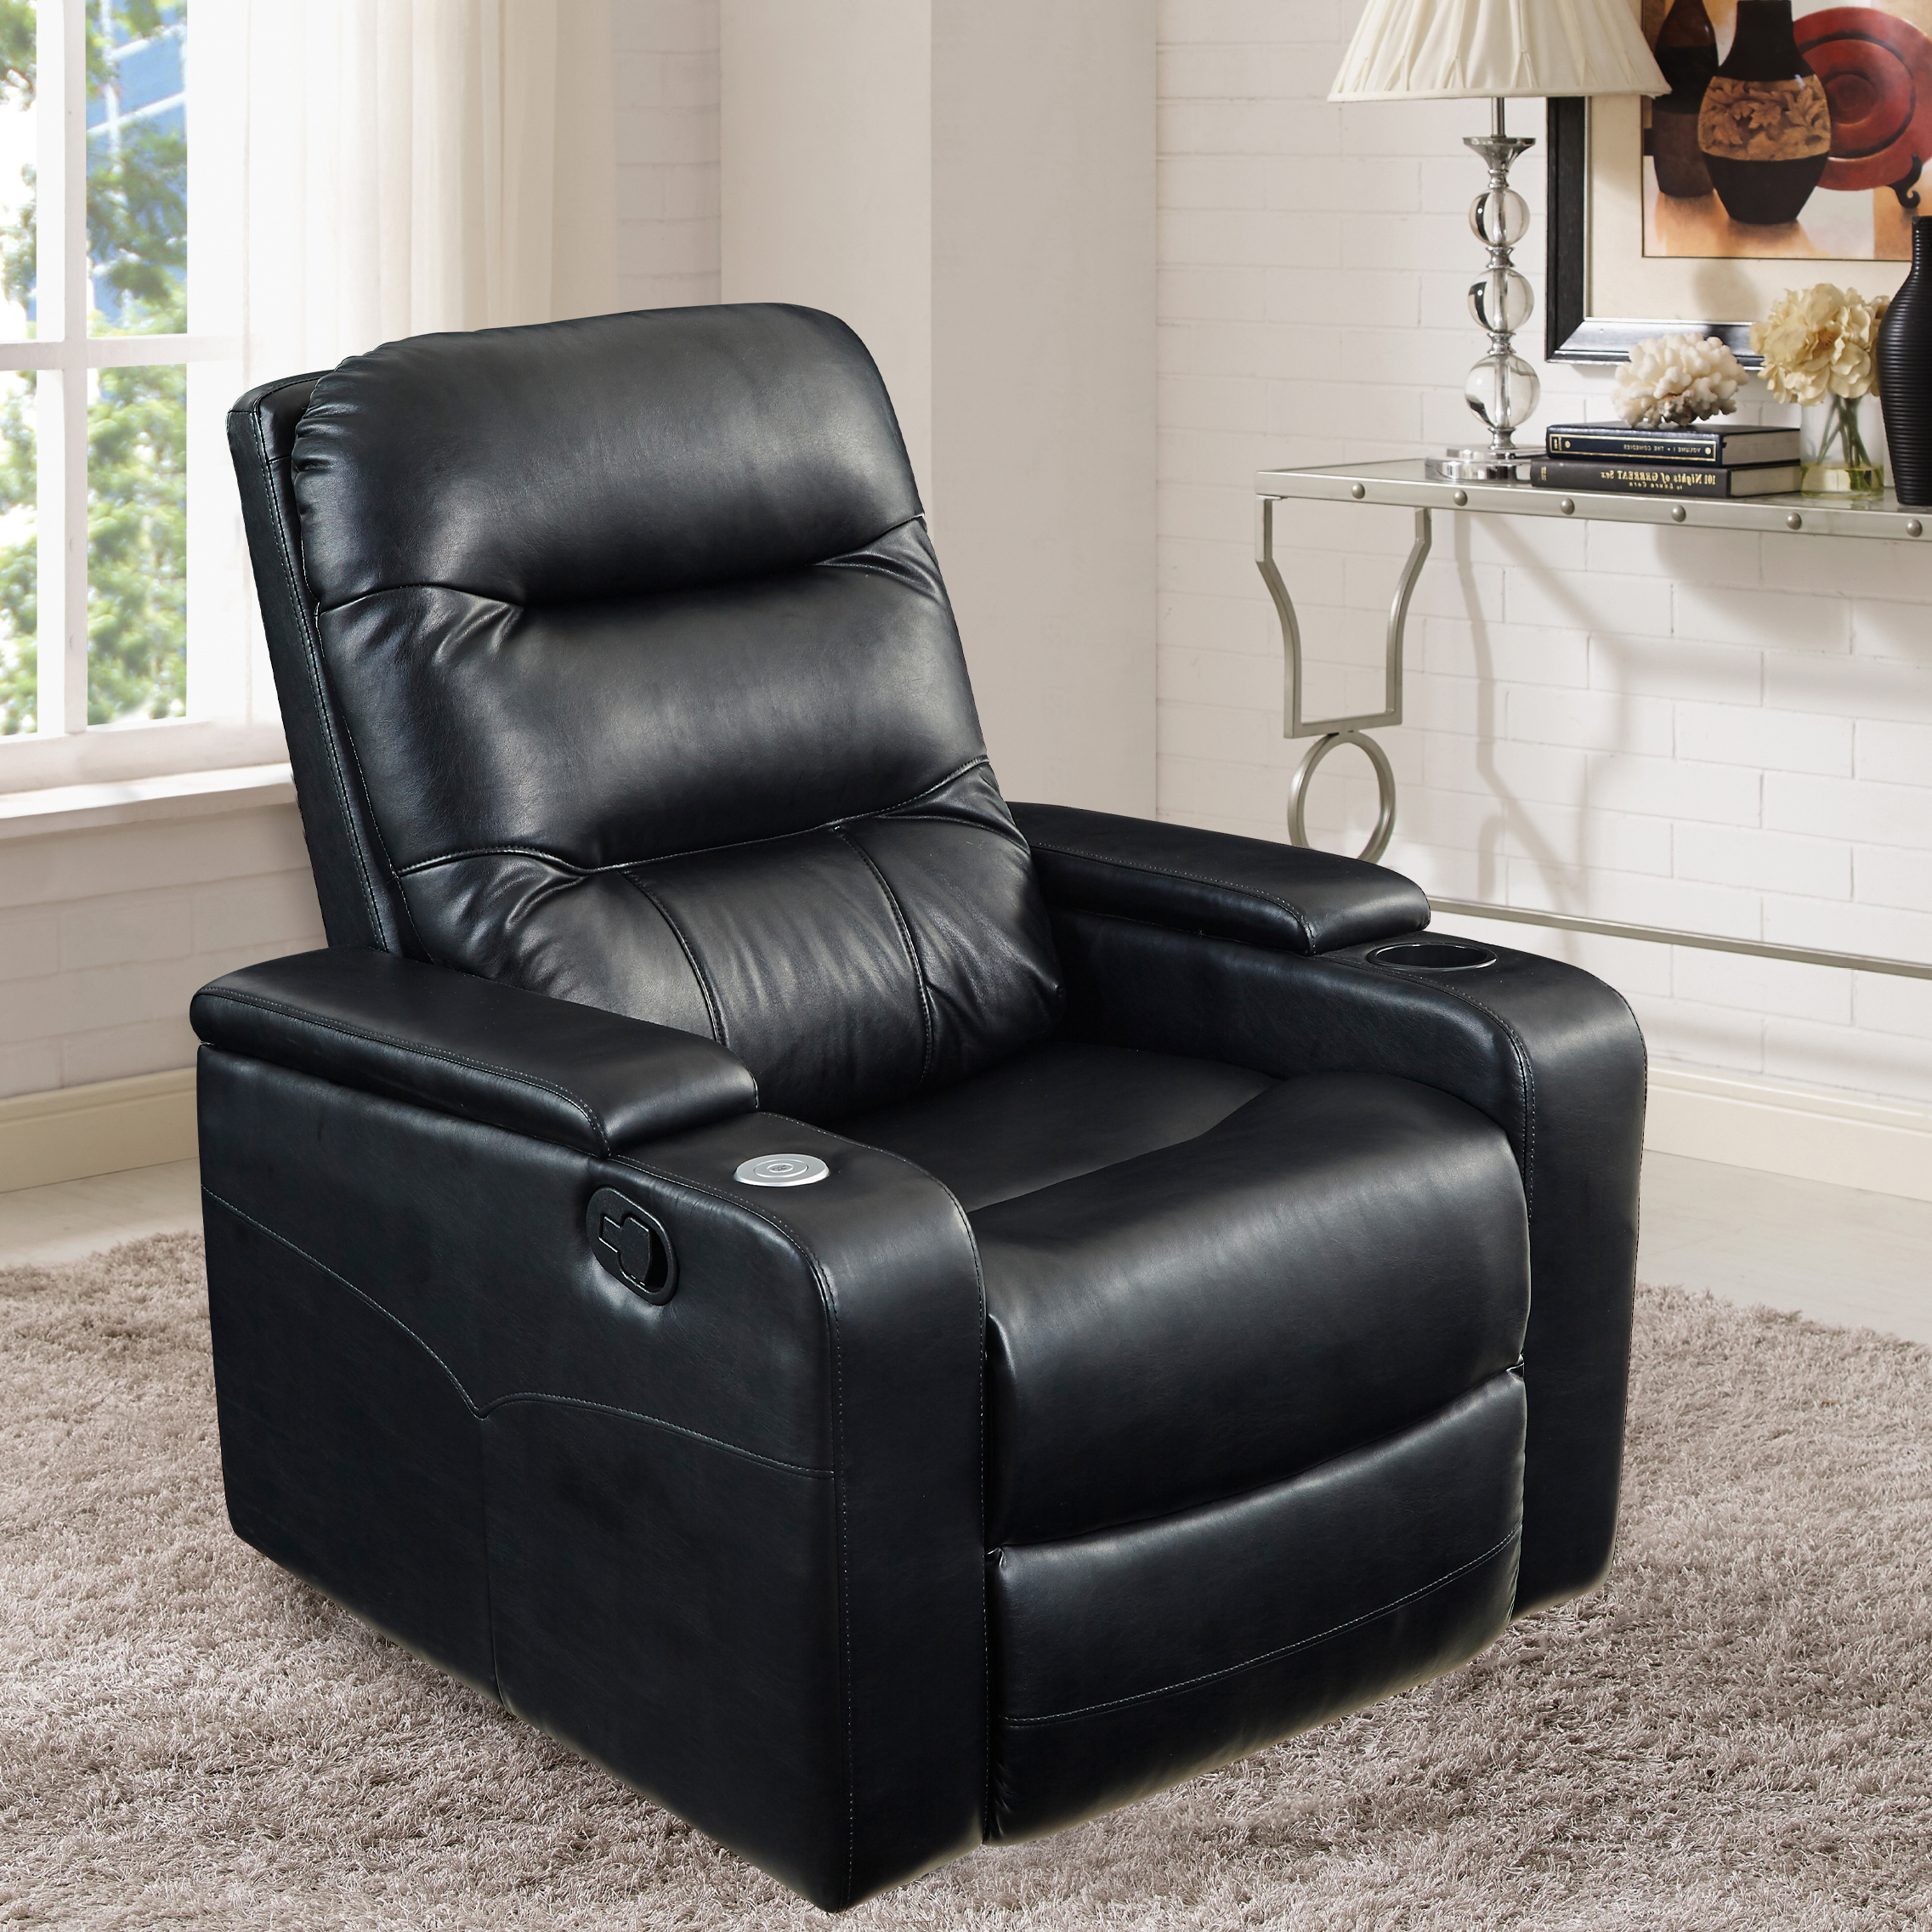 Relax-a-Lounger Lilac Manual Standard Recliner, Black Fabric - image 1 of 16